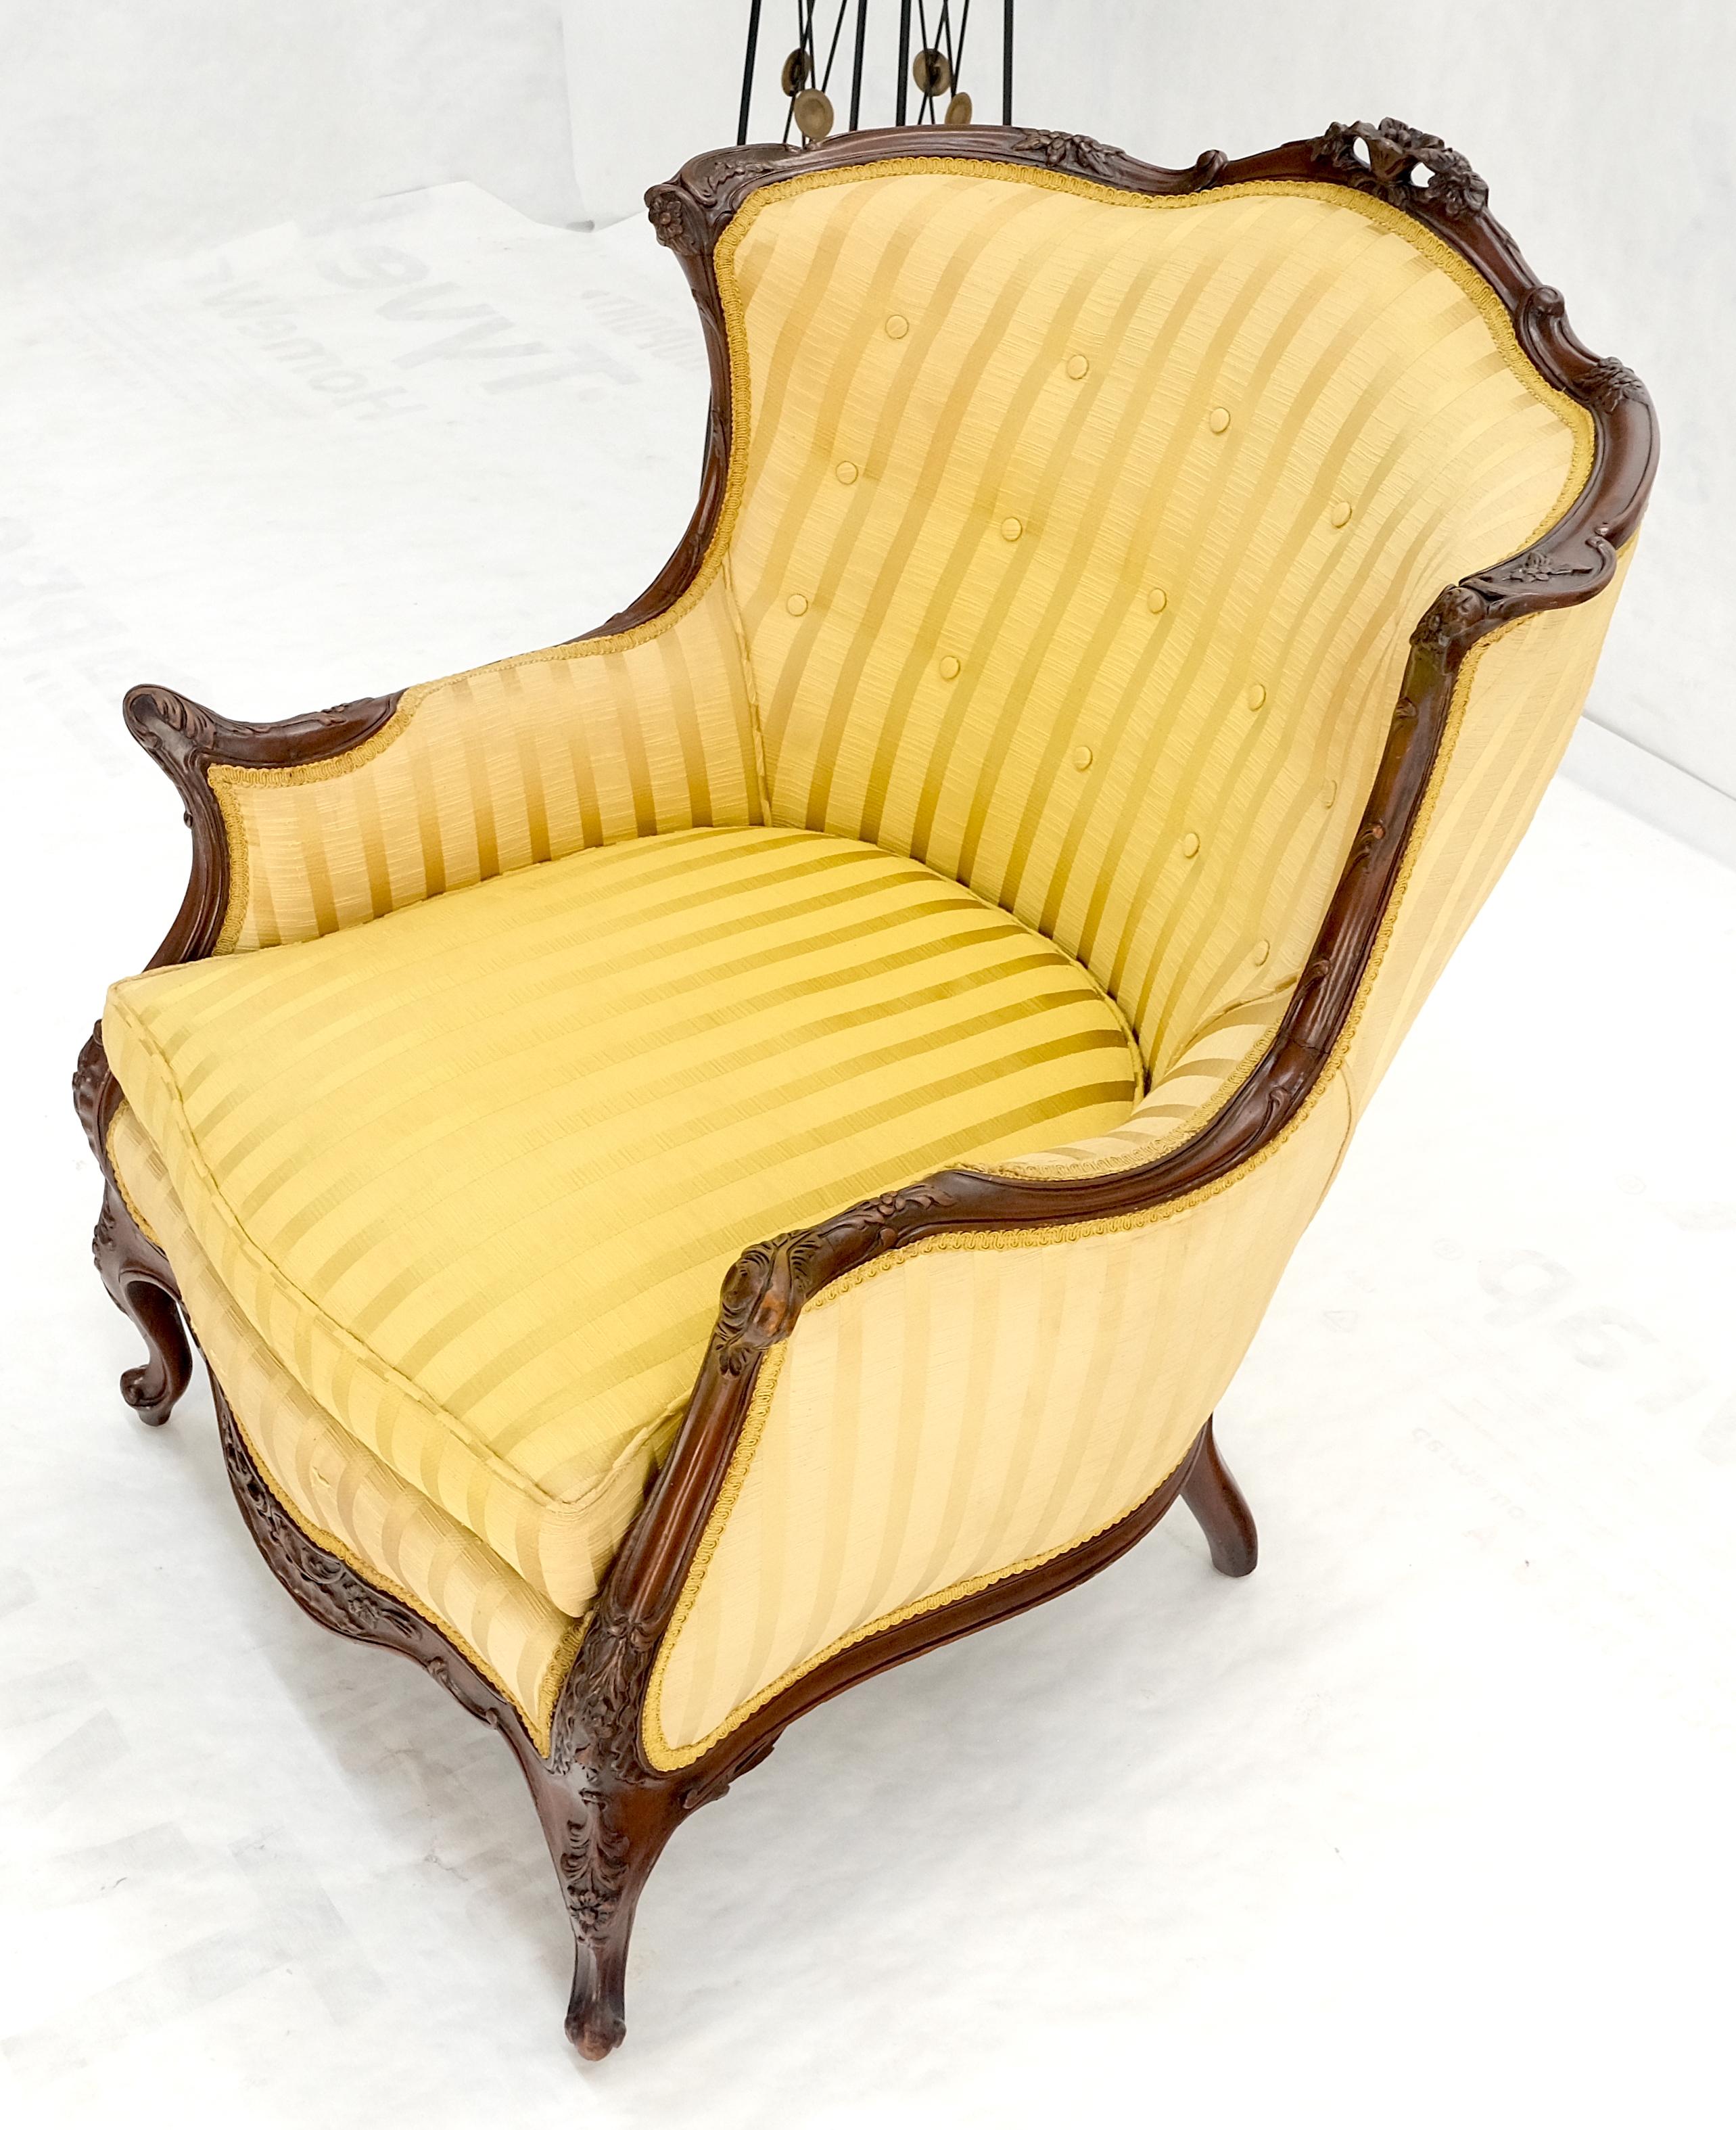 Striped Gold Upholstery Fine Deep Carved Mahogany Frame Lounge Chair Solid Frame For Sale 6